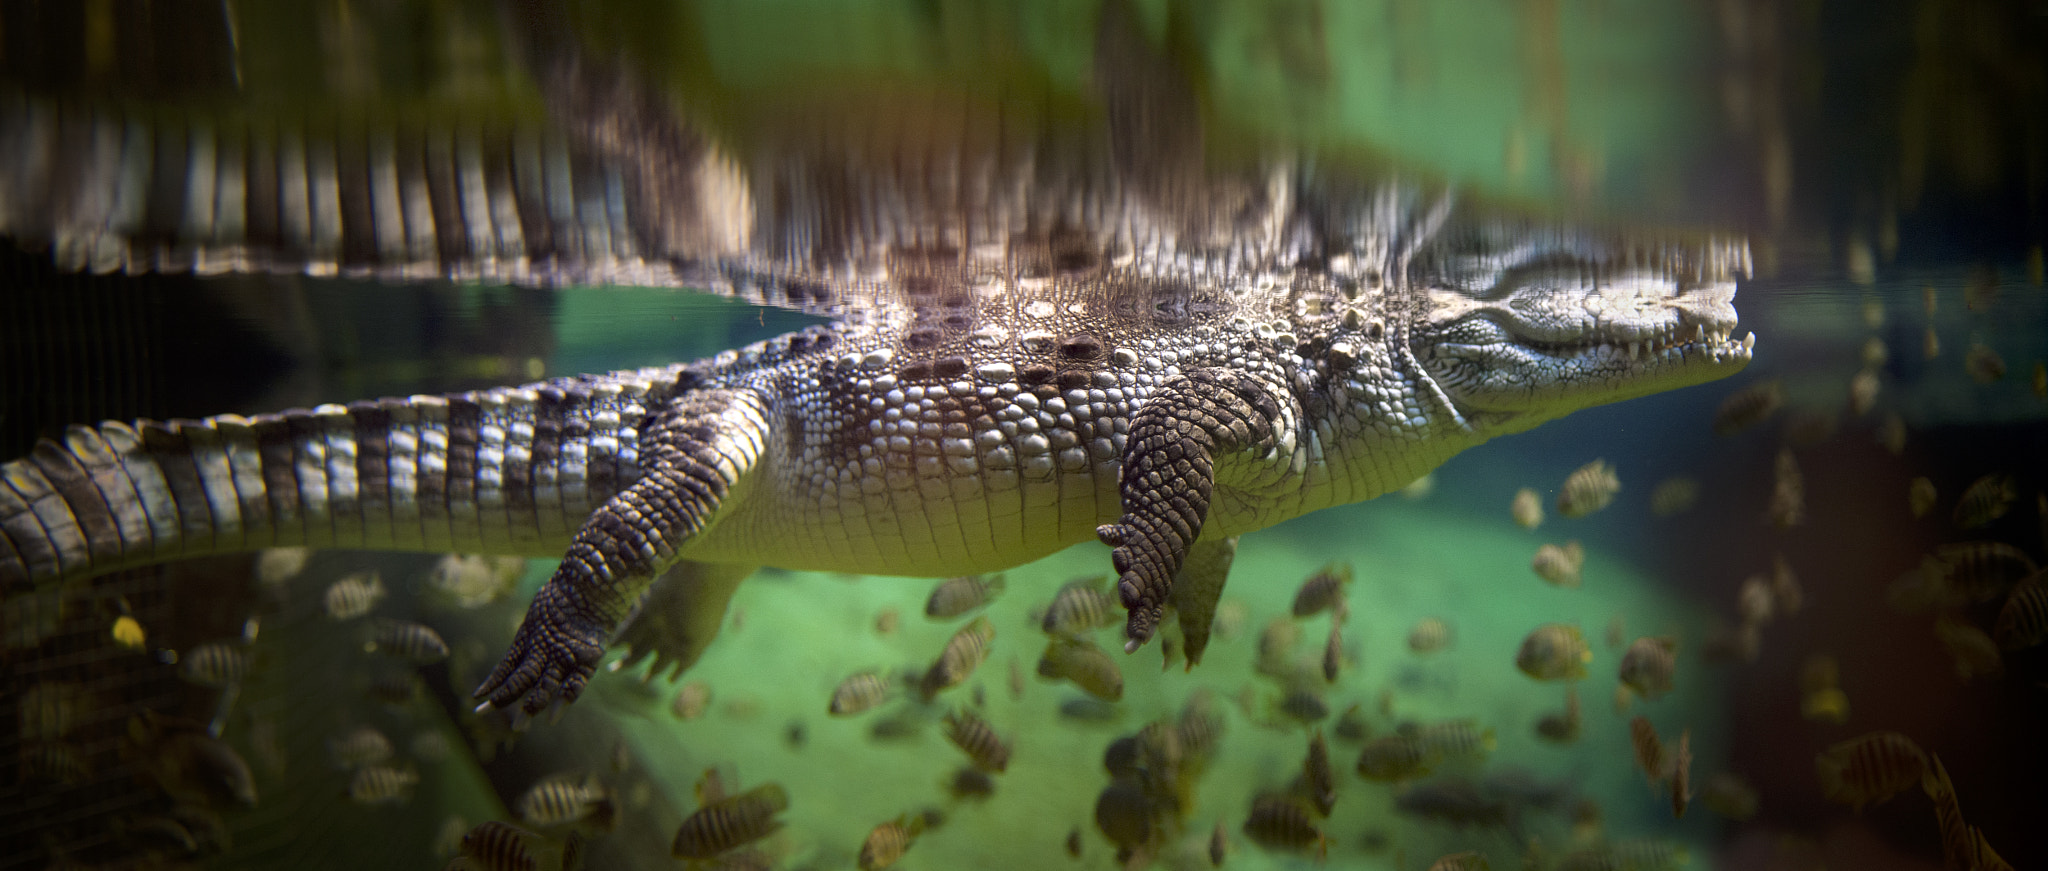 Panoramic Underwater View Of Alligator With Blurred Background Wallpaper